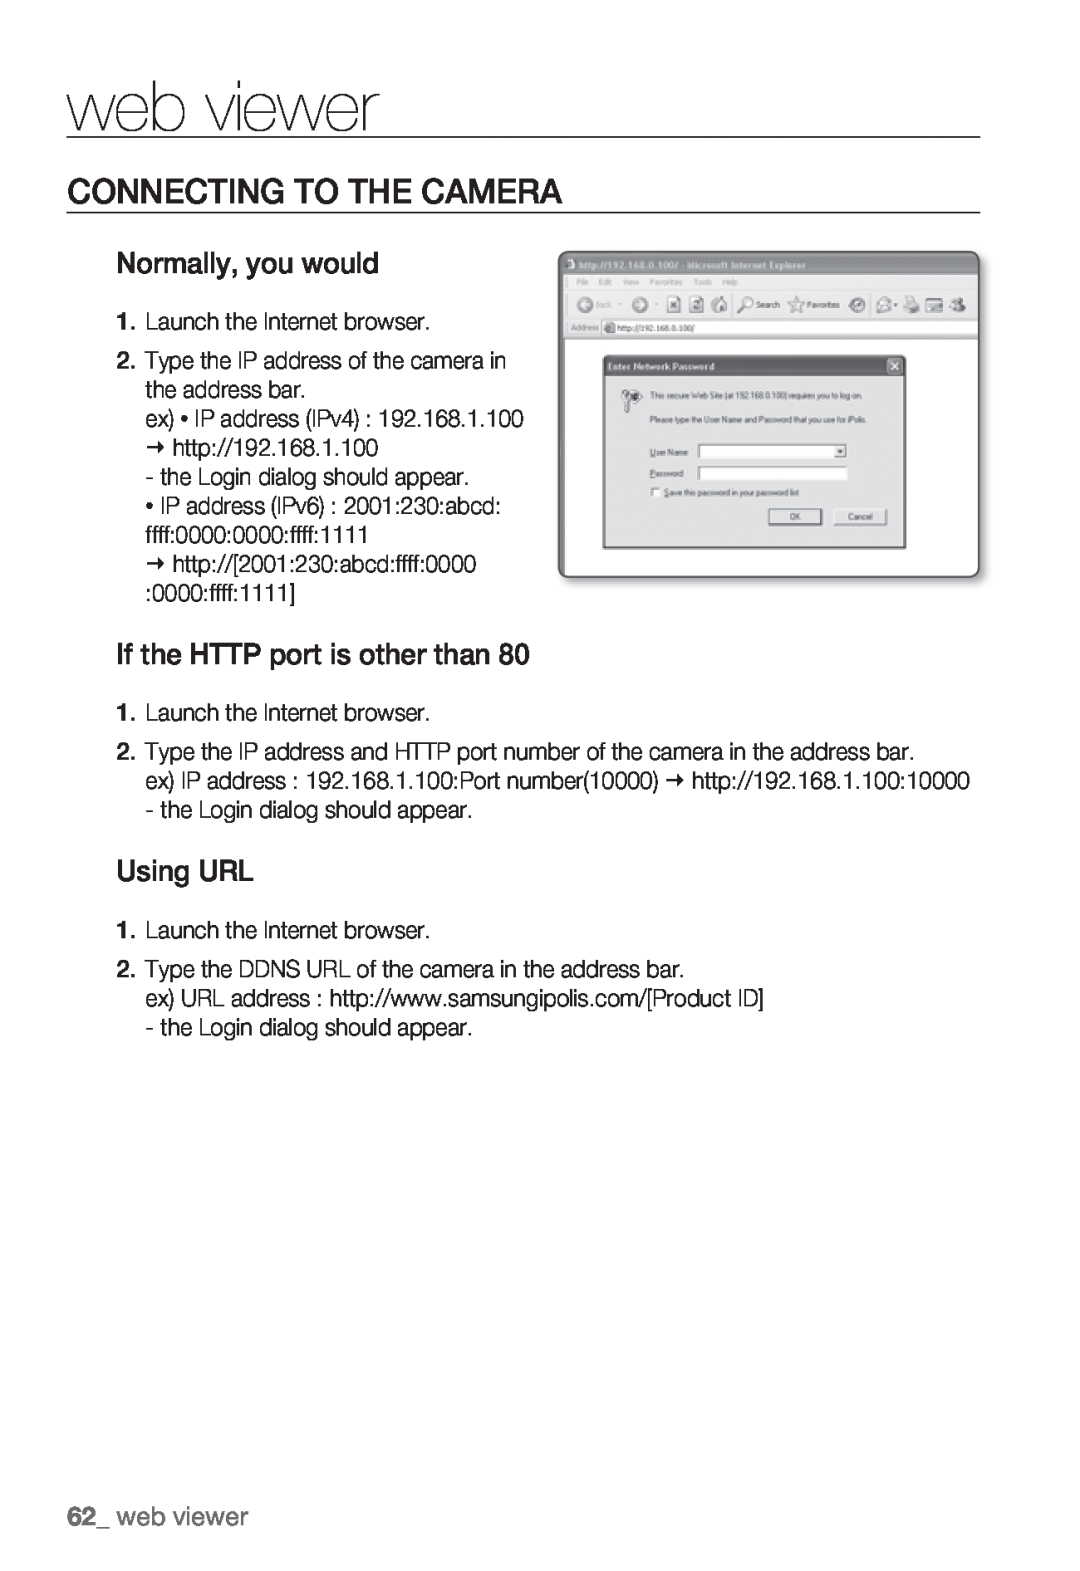 Samsung SNB-5000, SNV-5080, SND-5080F, SNB5000 user manual web viewer, Connecting To The Camera 